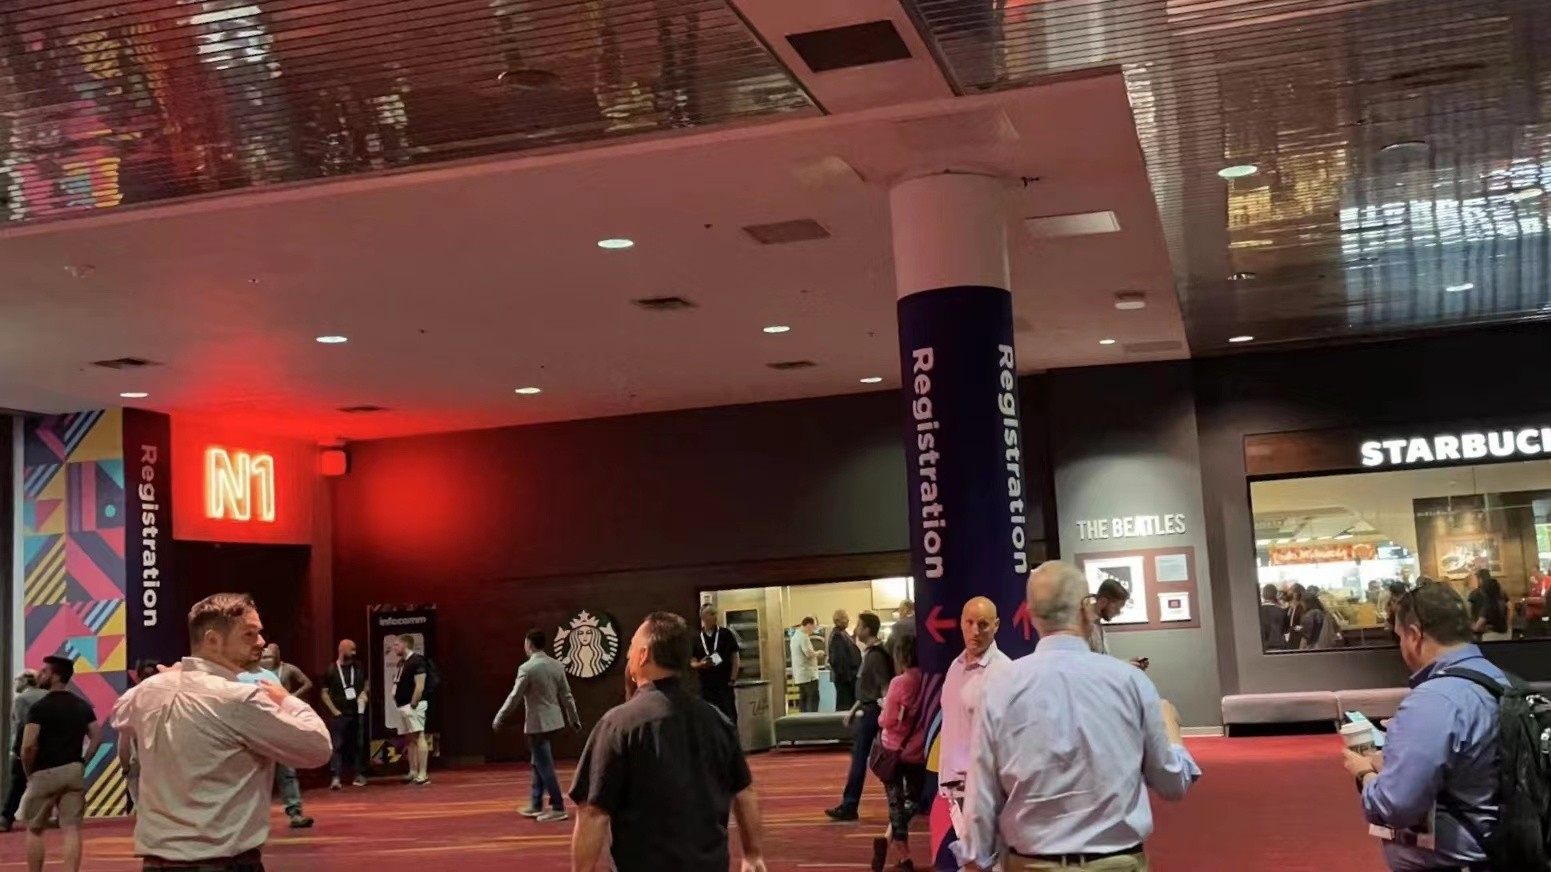 VHD Exhibited at Infocomm US 2022 and the Show Ended Successfully